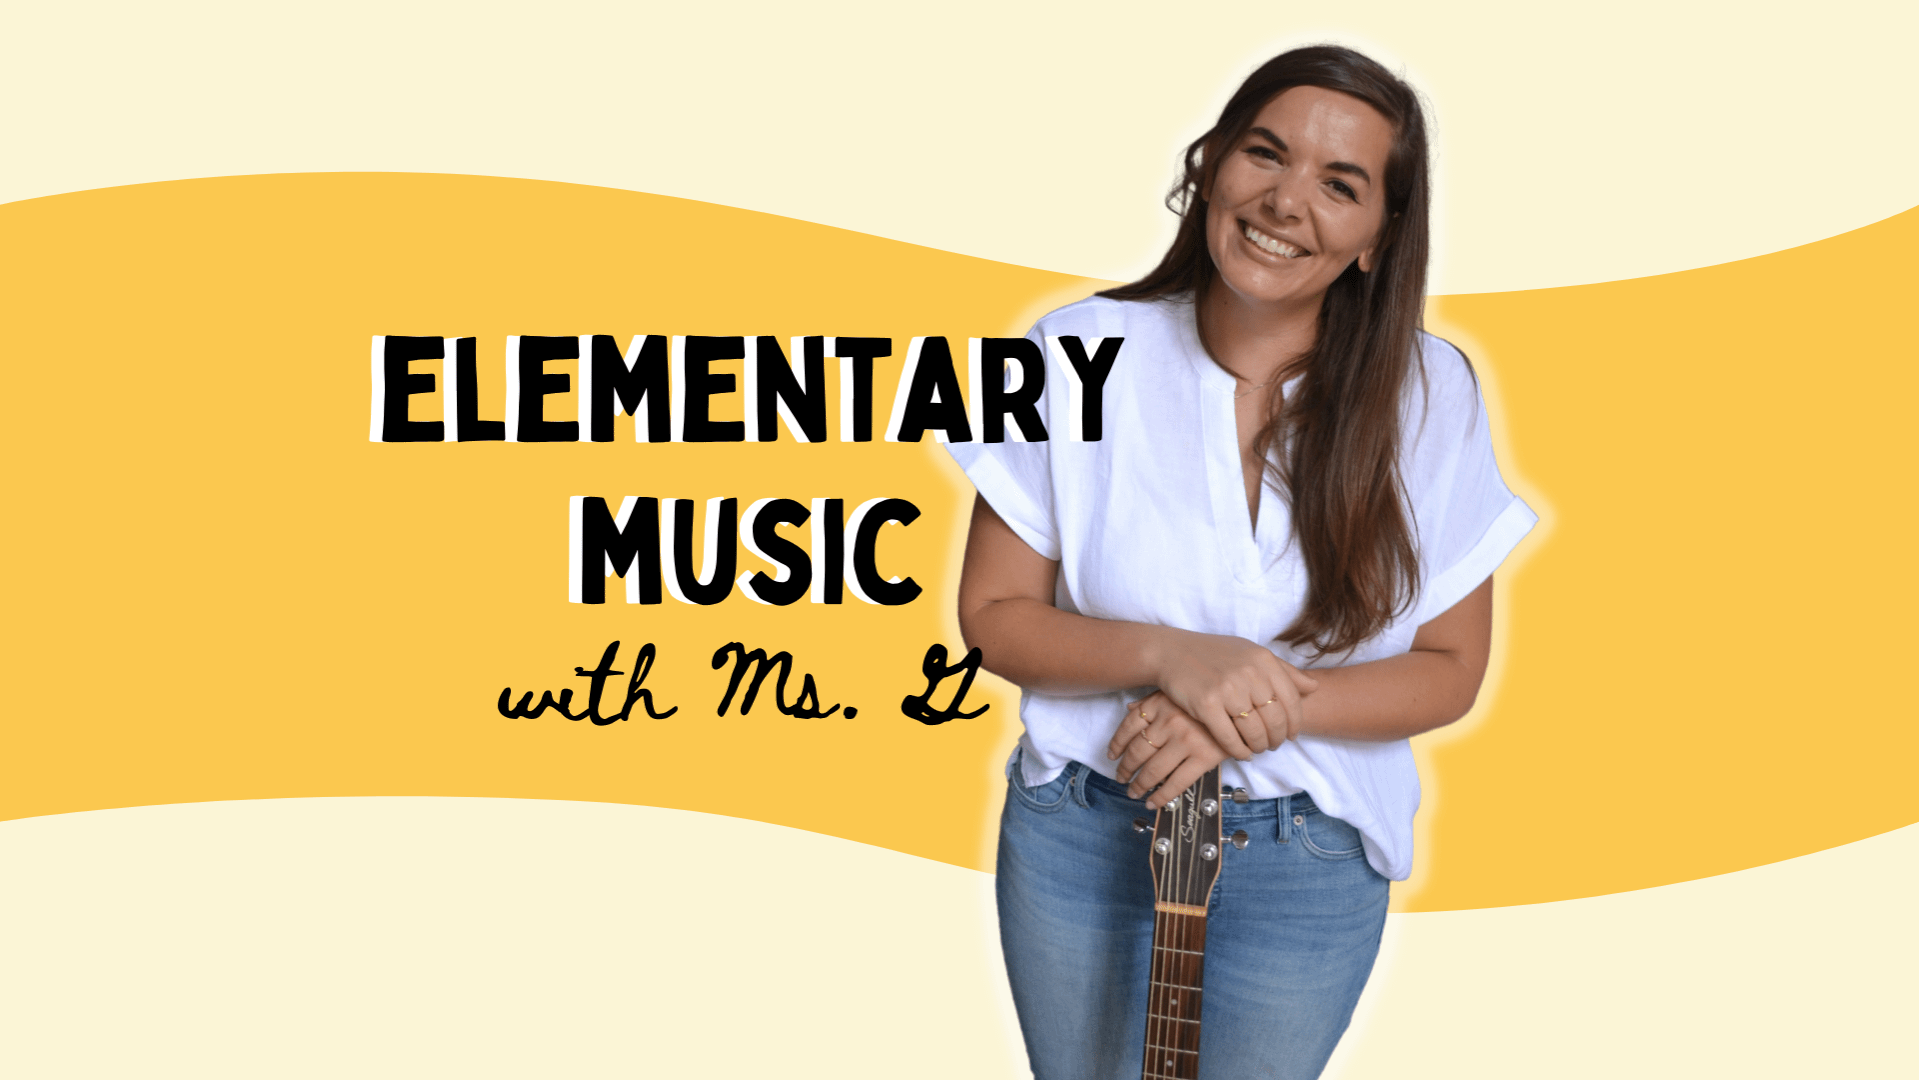 Outschool - Elementary Music with Ms. G